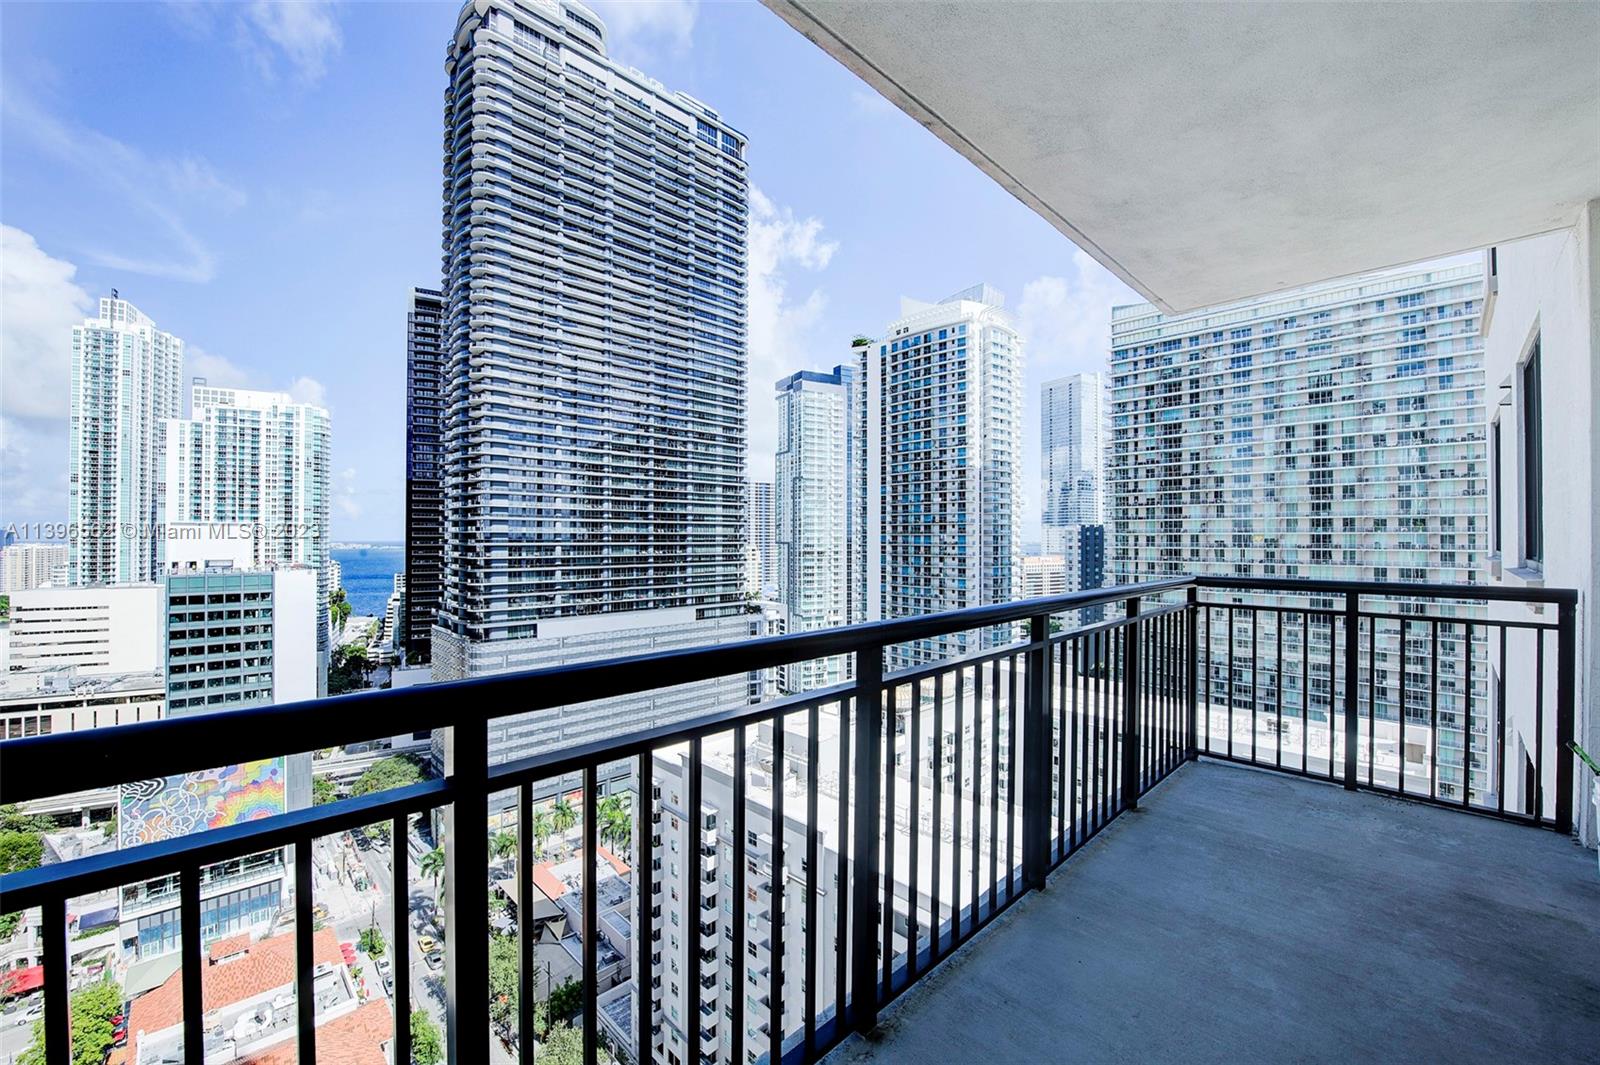 999 SW 1st Ave 2402, Miami, Florida 33130, 2 Bedrooms Bedrooms, ,2 BathroomsBathrooms,Residential,For Sale,999 SW 1st Ave 2402,A11396562